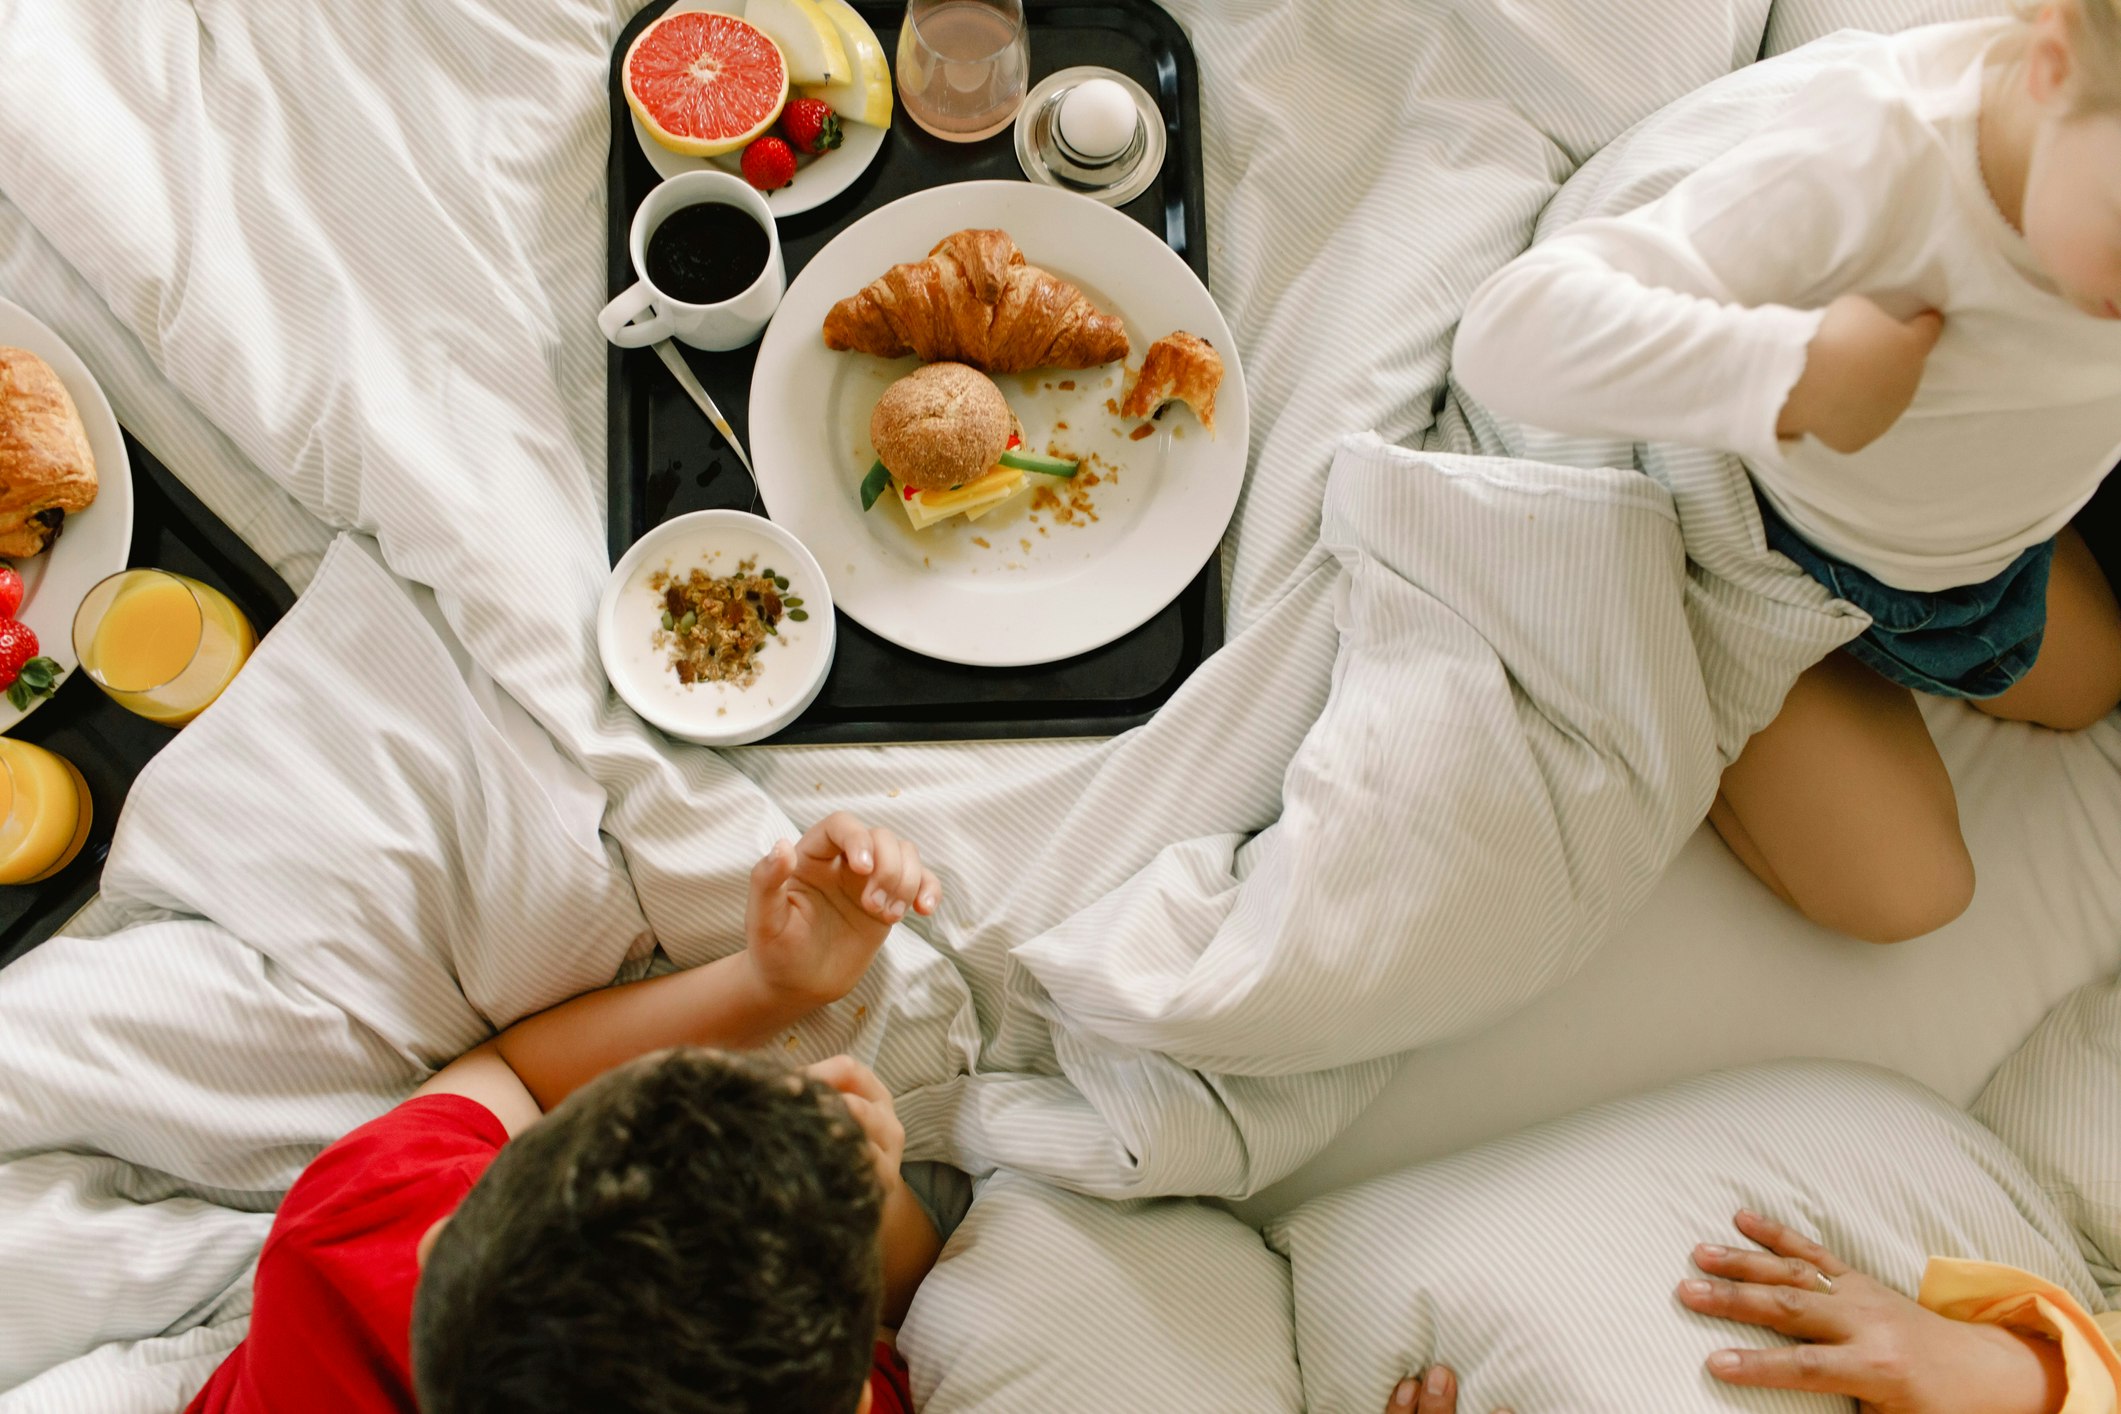 Directly above shot of family having breakfast on bed in hotel - stock photo